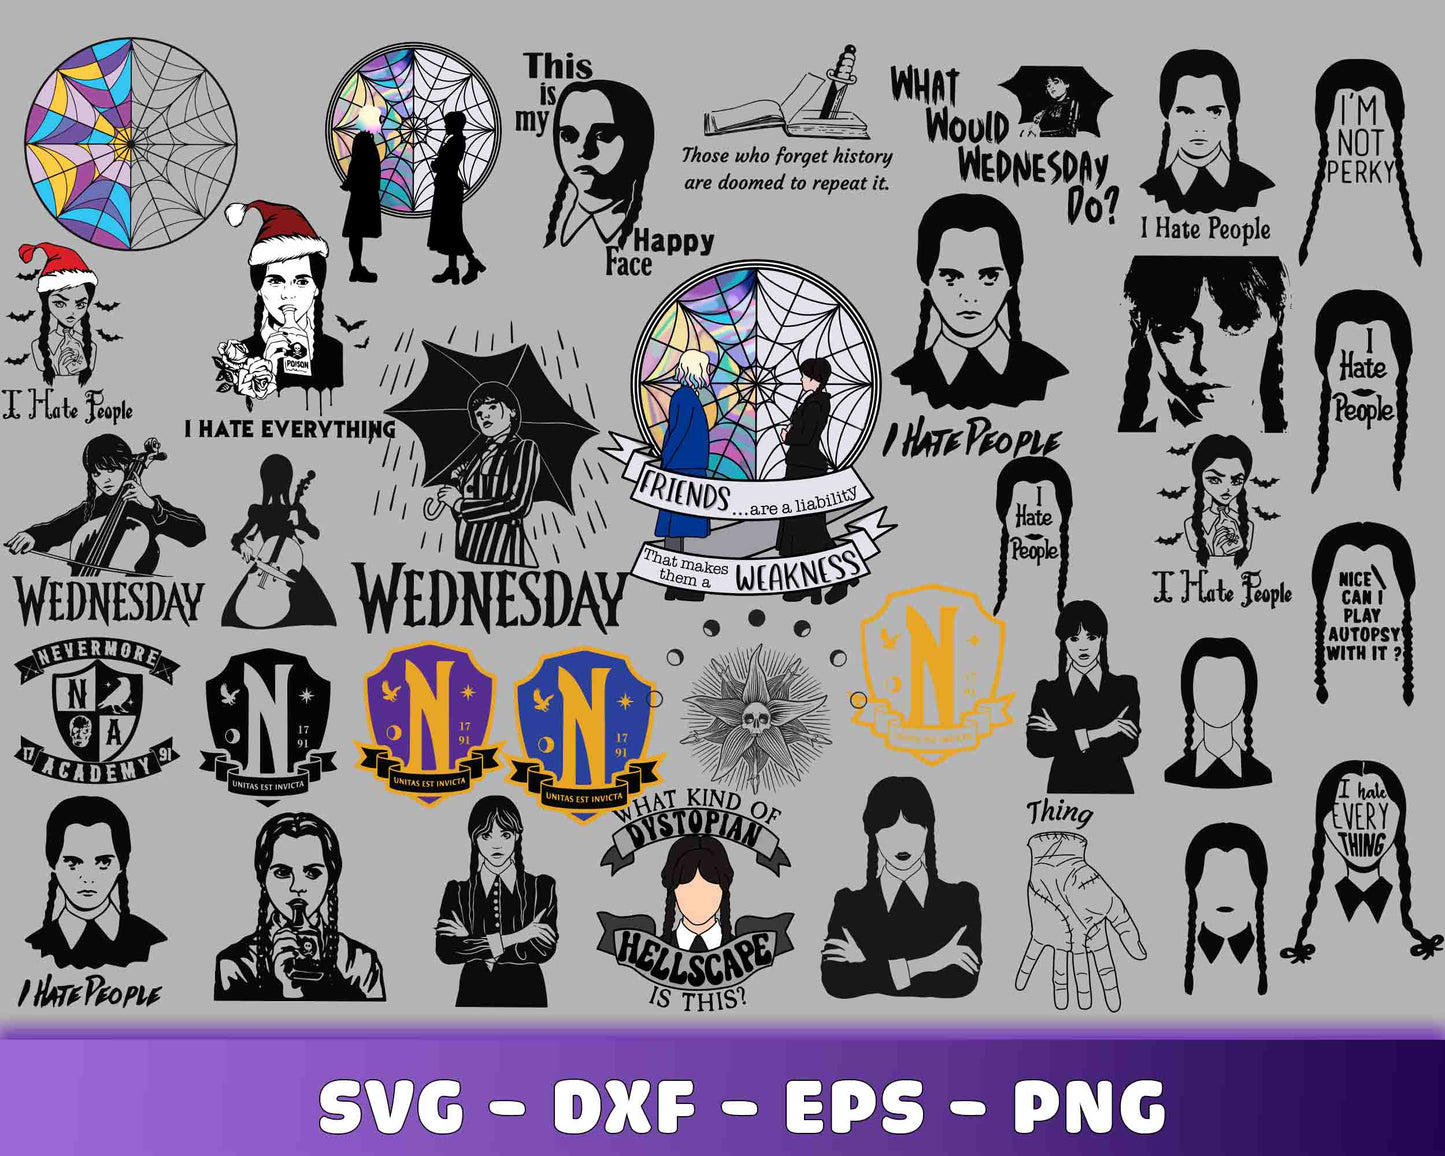 160+ file Wednesday Addams  bundle SVG , Wednesday Addams SVG DXF EPS PNG, for Cricut, Silhouette, digital, file cut